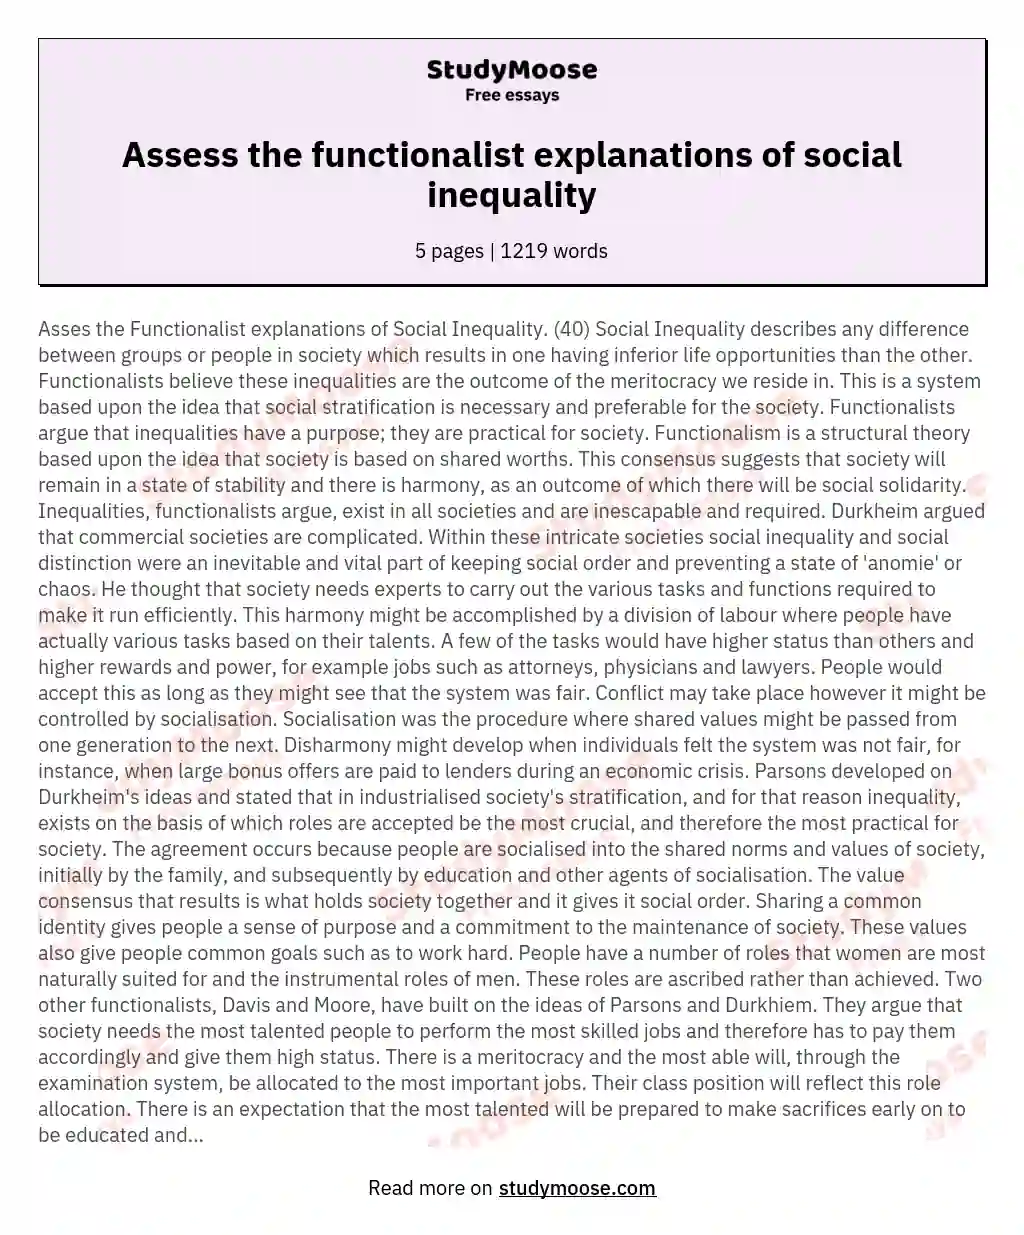 Assess the functionalist explanations of social inequality essay